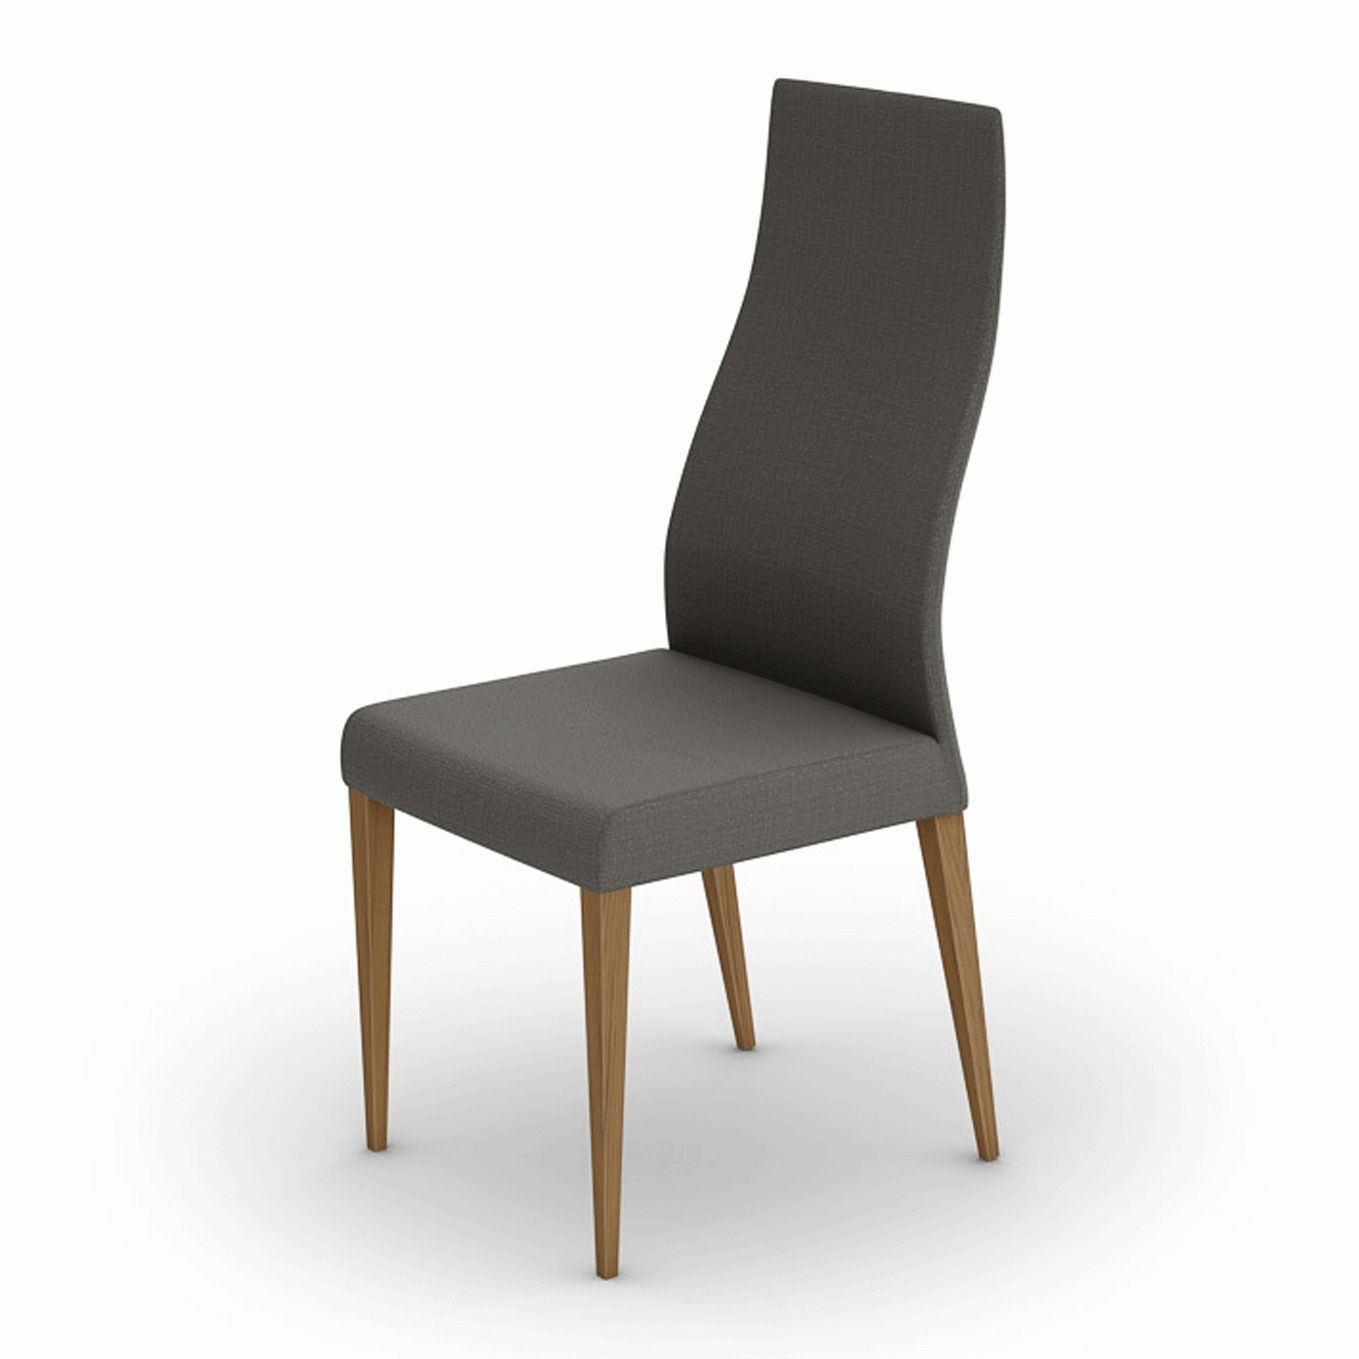 Danco Regarding High Back Dining Chairs (View 4 of 25)